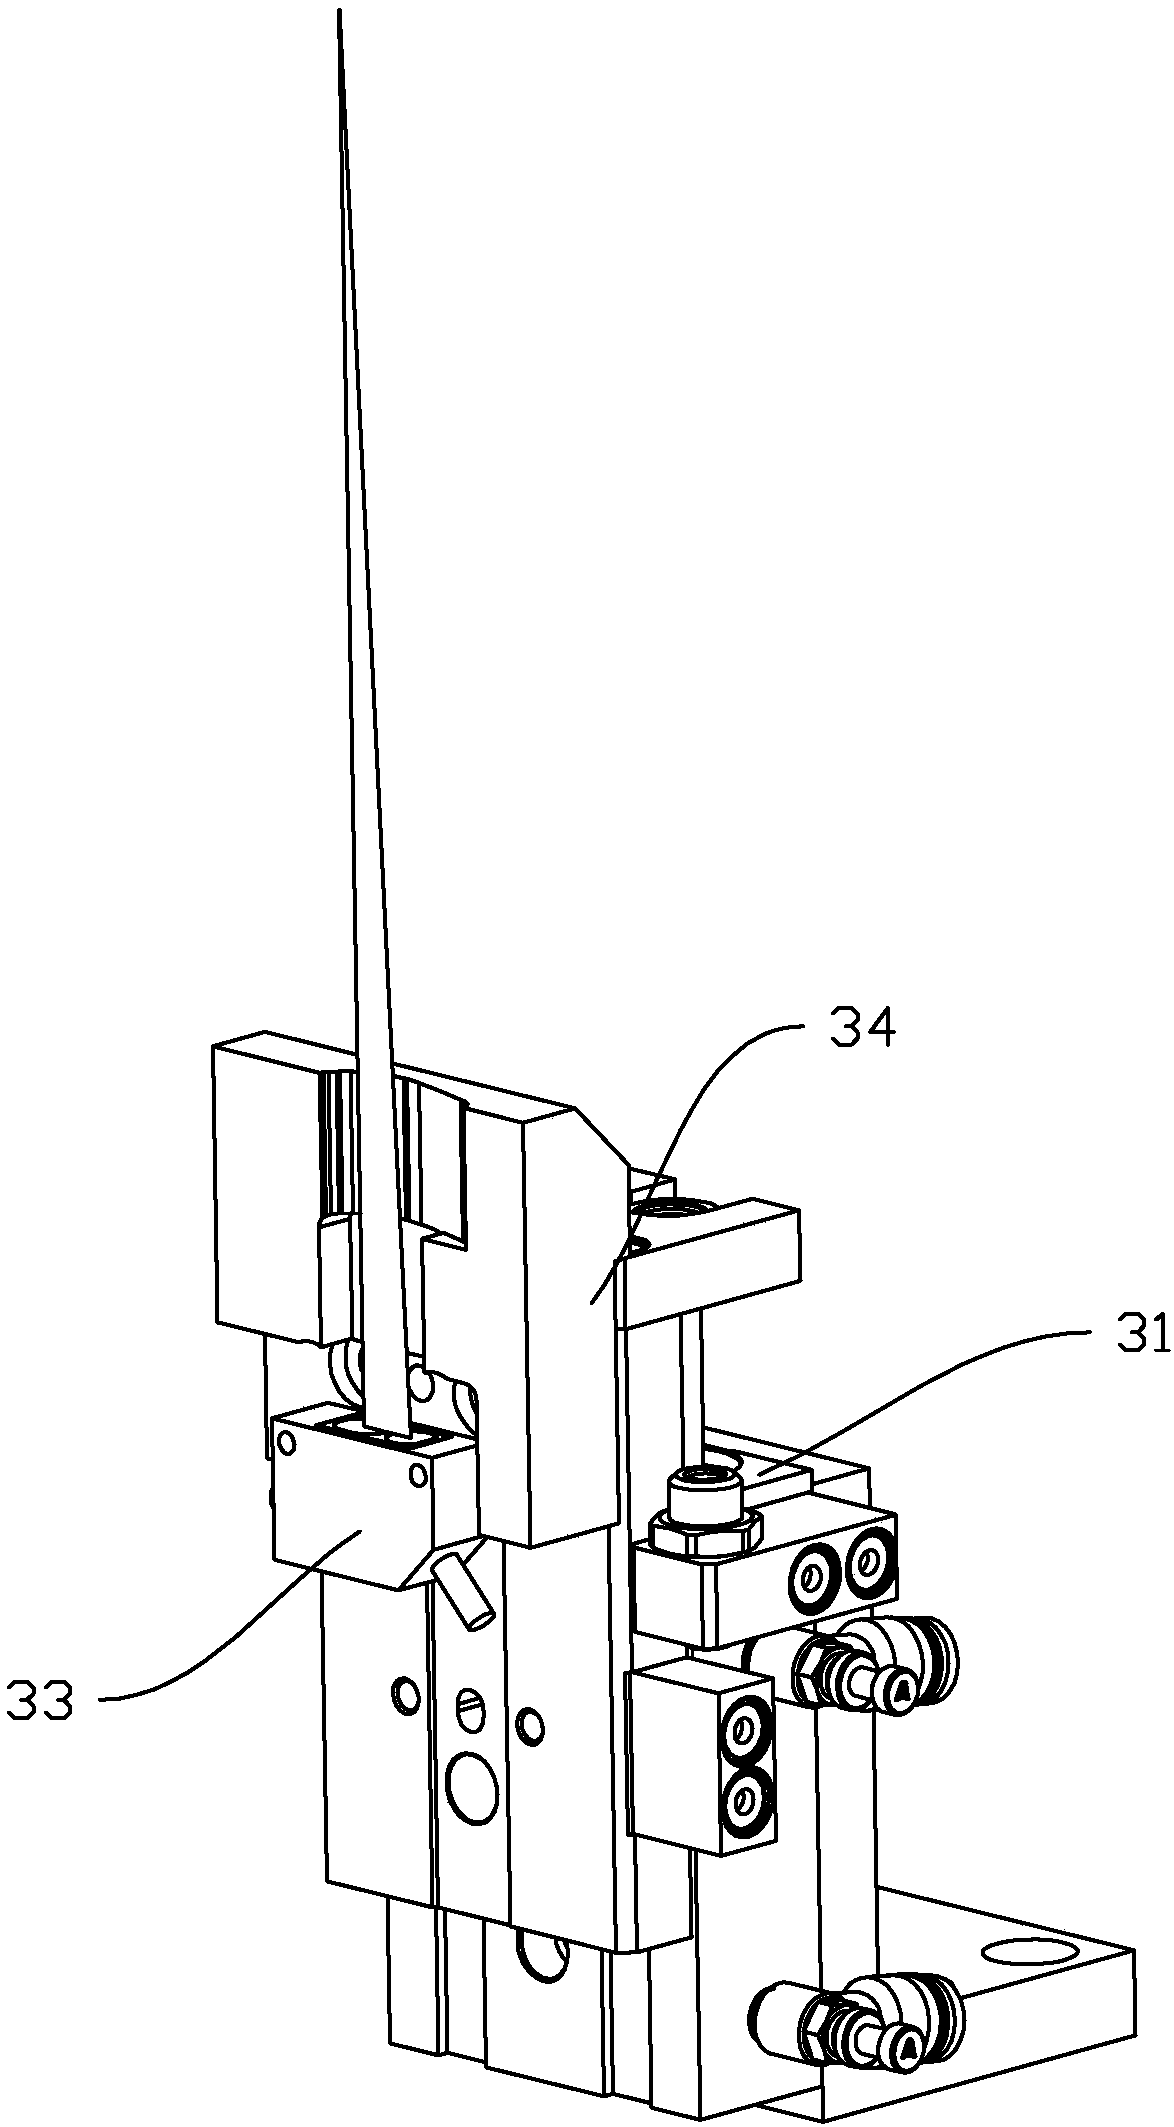 Automatic system used for removing burrs on side edge of three-dimensional space of injection molded part